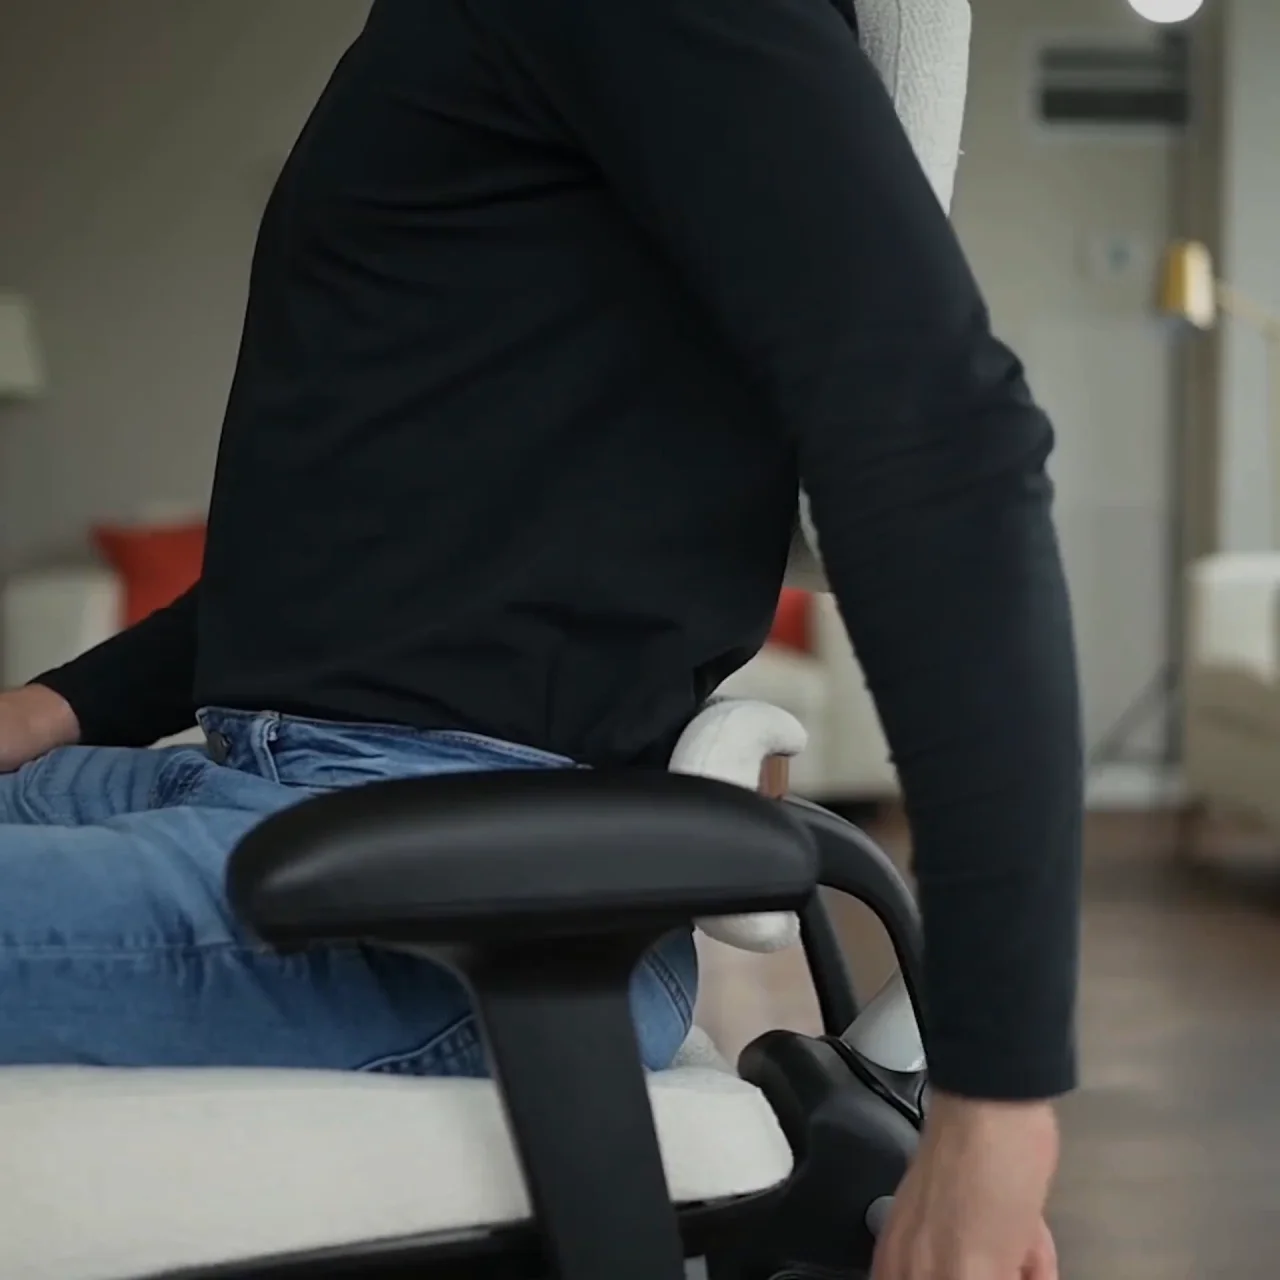 HOW TO TREAT PIRIFORMIS SYNDROME: THE ROLE OF THE SEAT CUSHION - Fine Foams